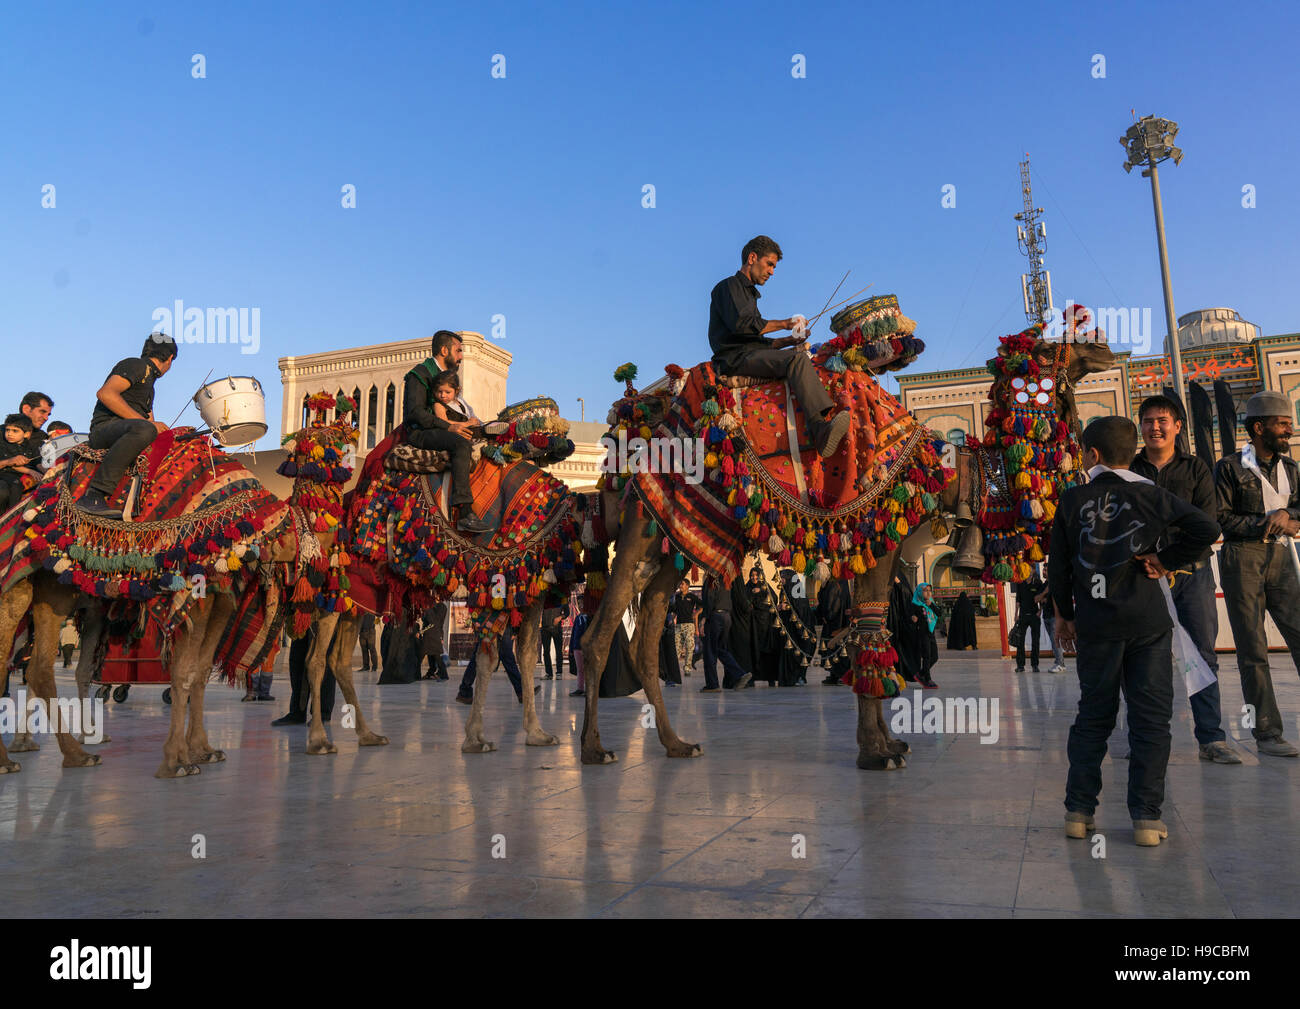 Procession with camels during muharram celebrations in fatima al-masumeh shrine, Central county, Qom, Iran Stock Photo